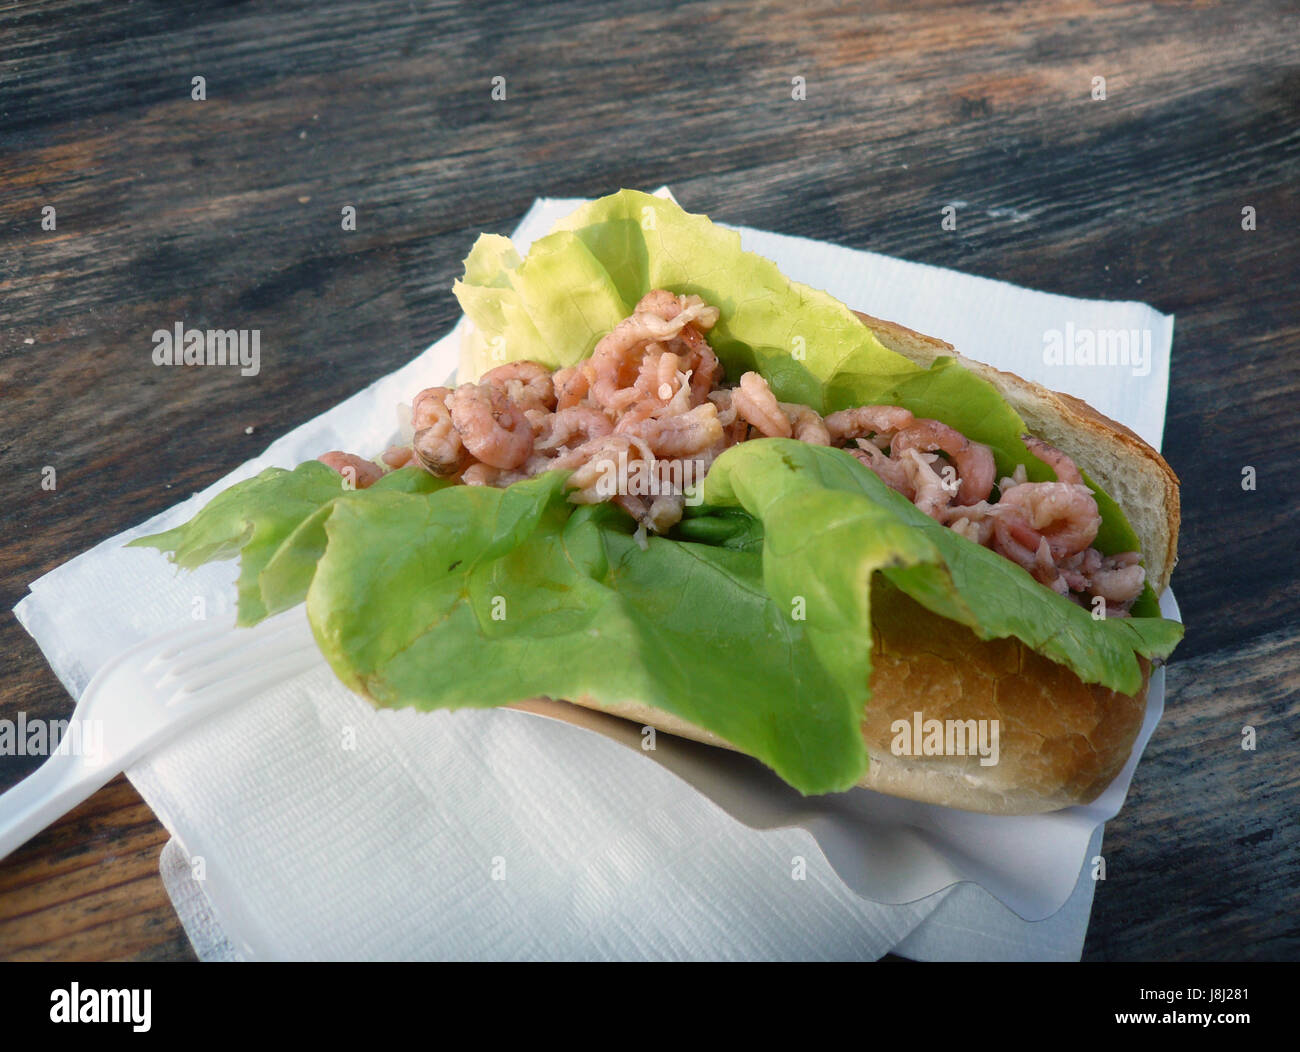 dainty, crabs, roll, kaiser, vast, profuse, considerable, fruitful, large Stock Photo